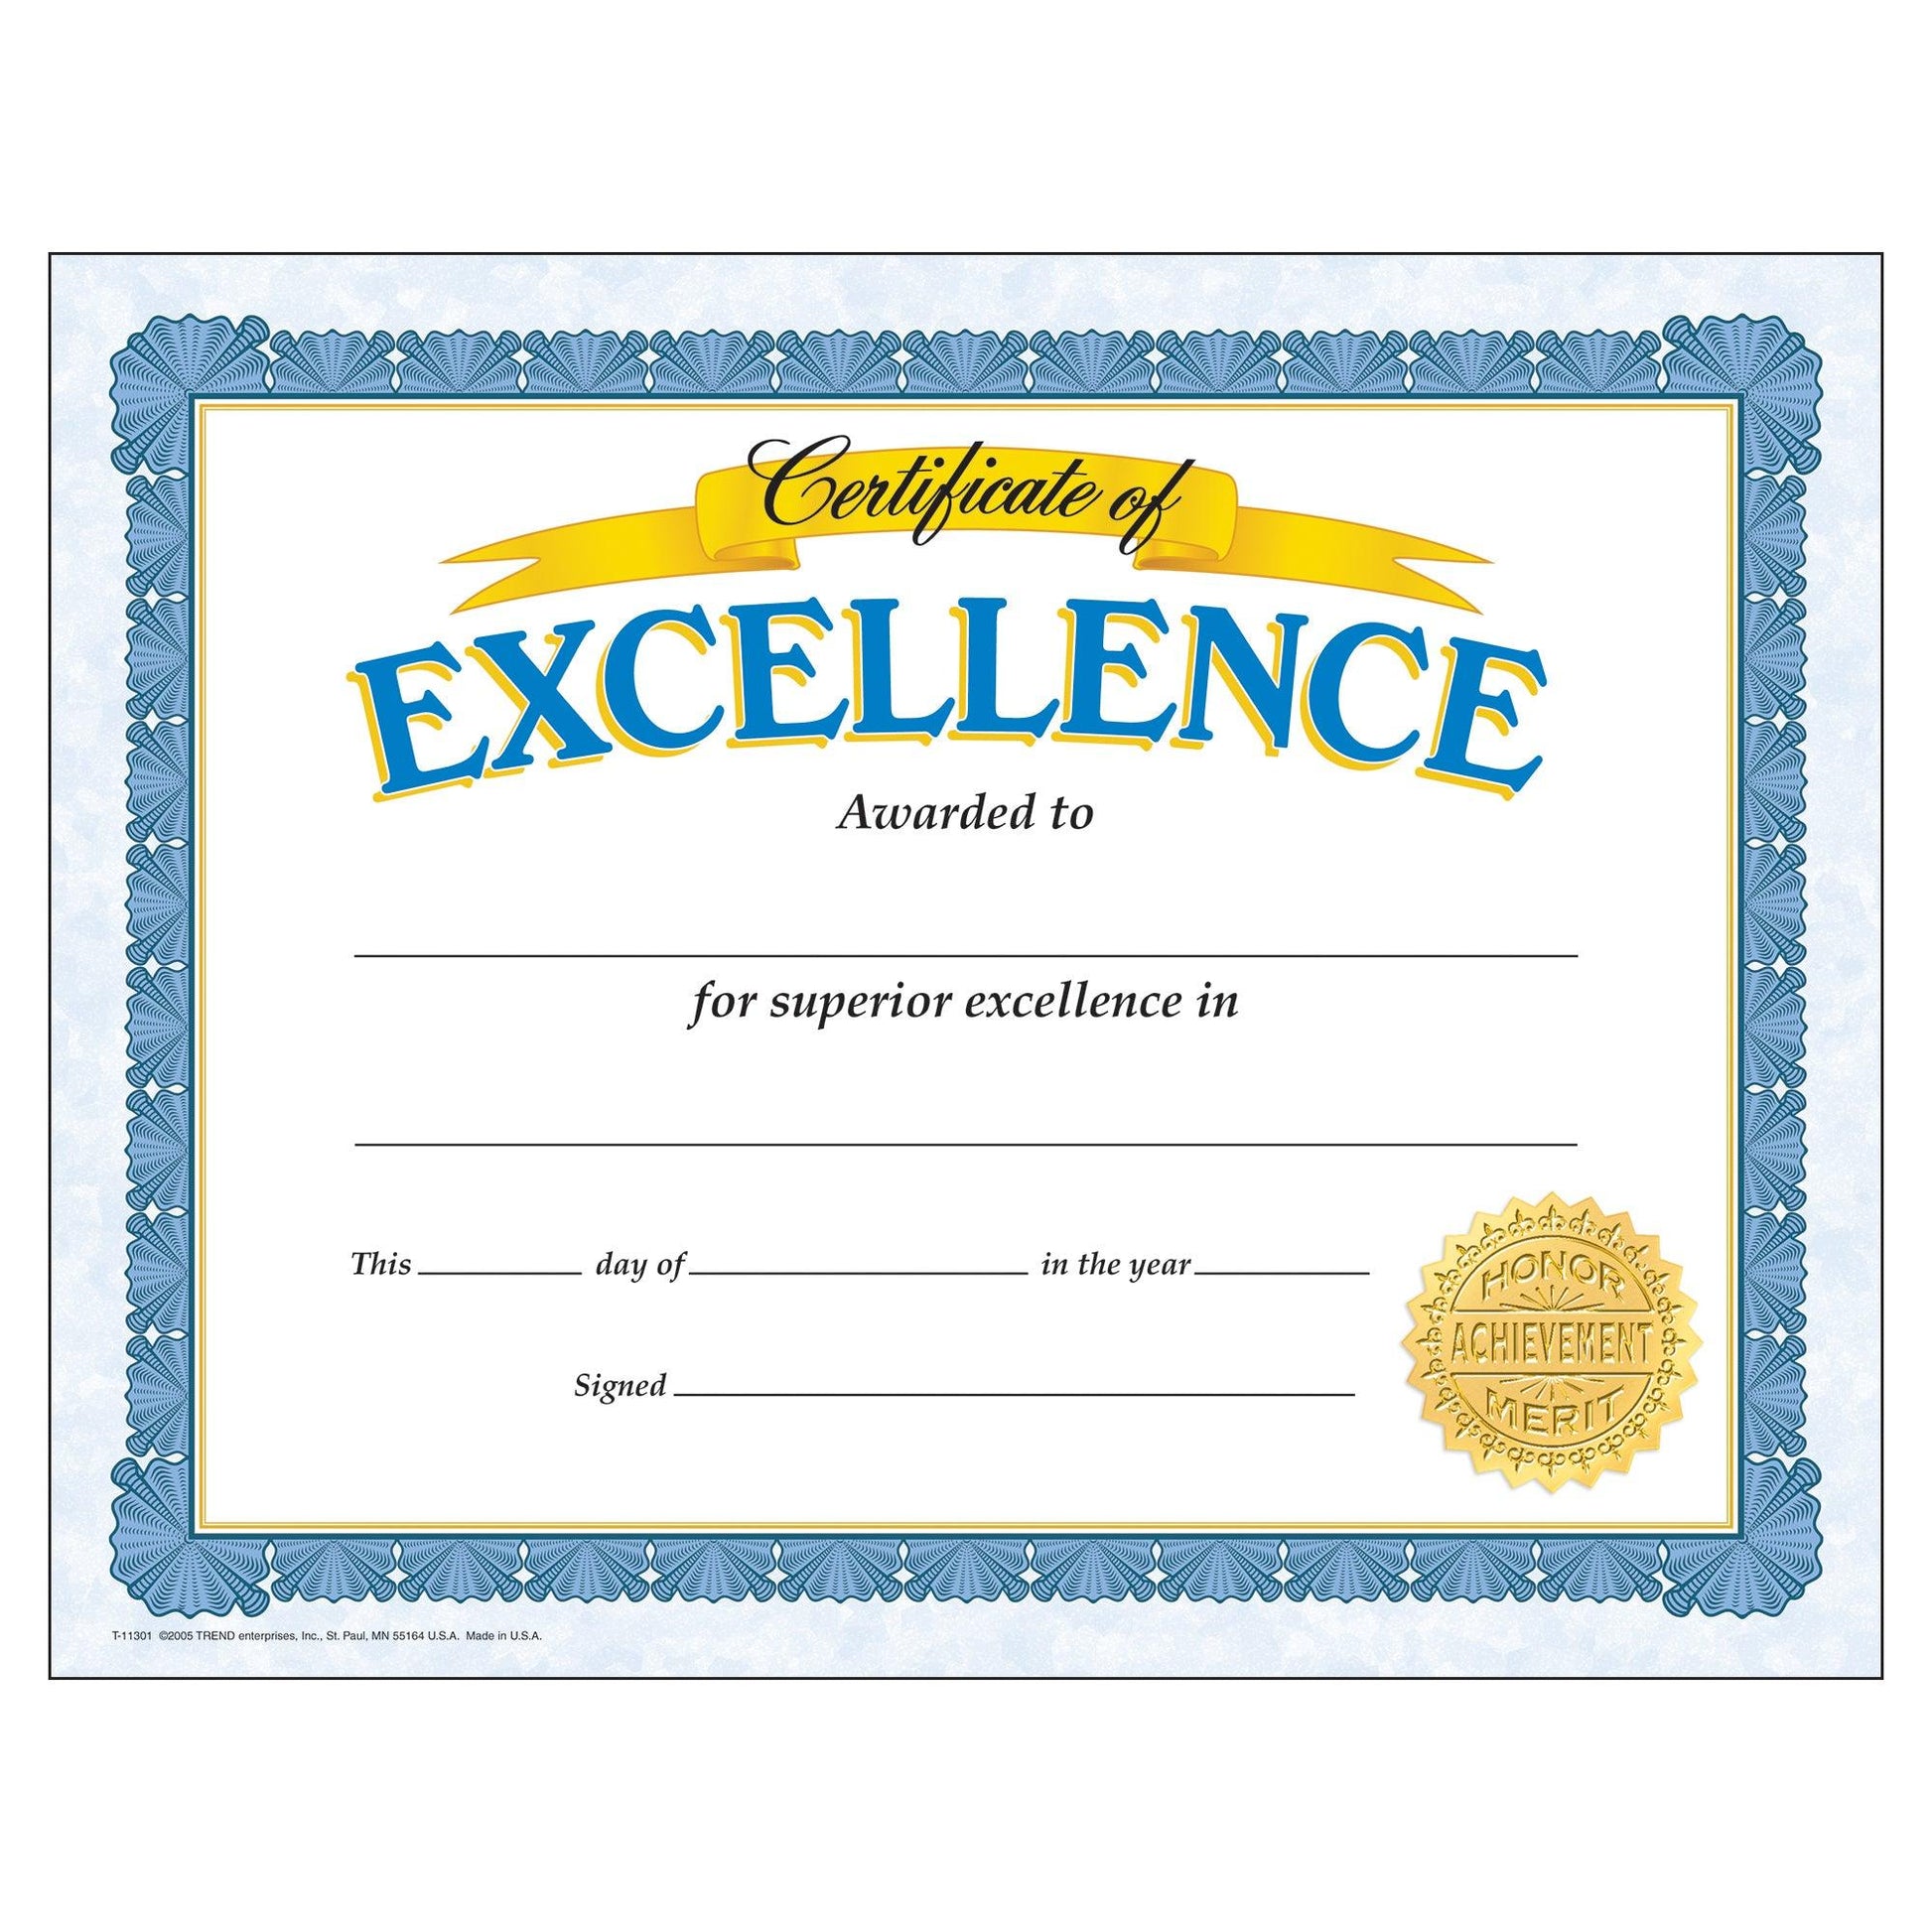 Certificate of Excellence Classic Certificates, 30 Per Pack, 6 Packs - Loomini